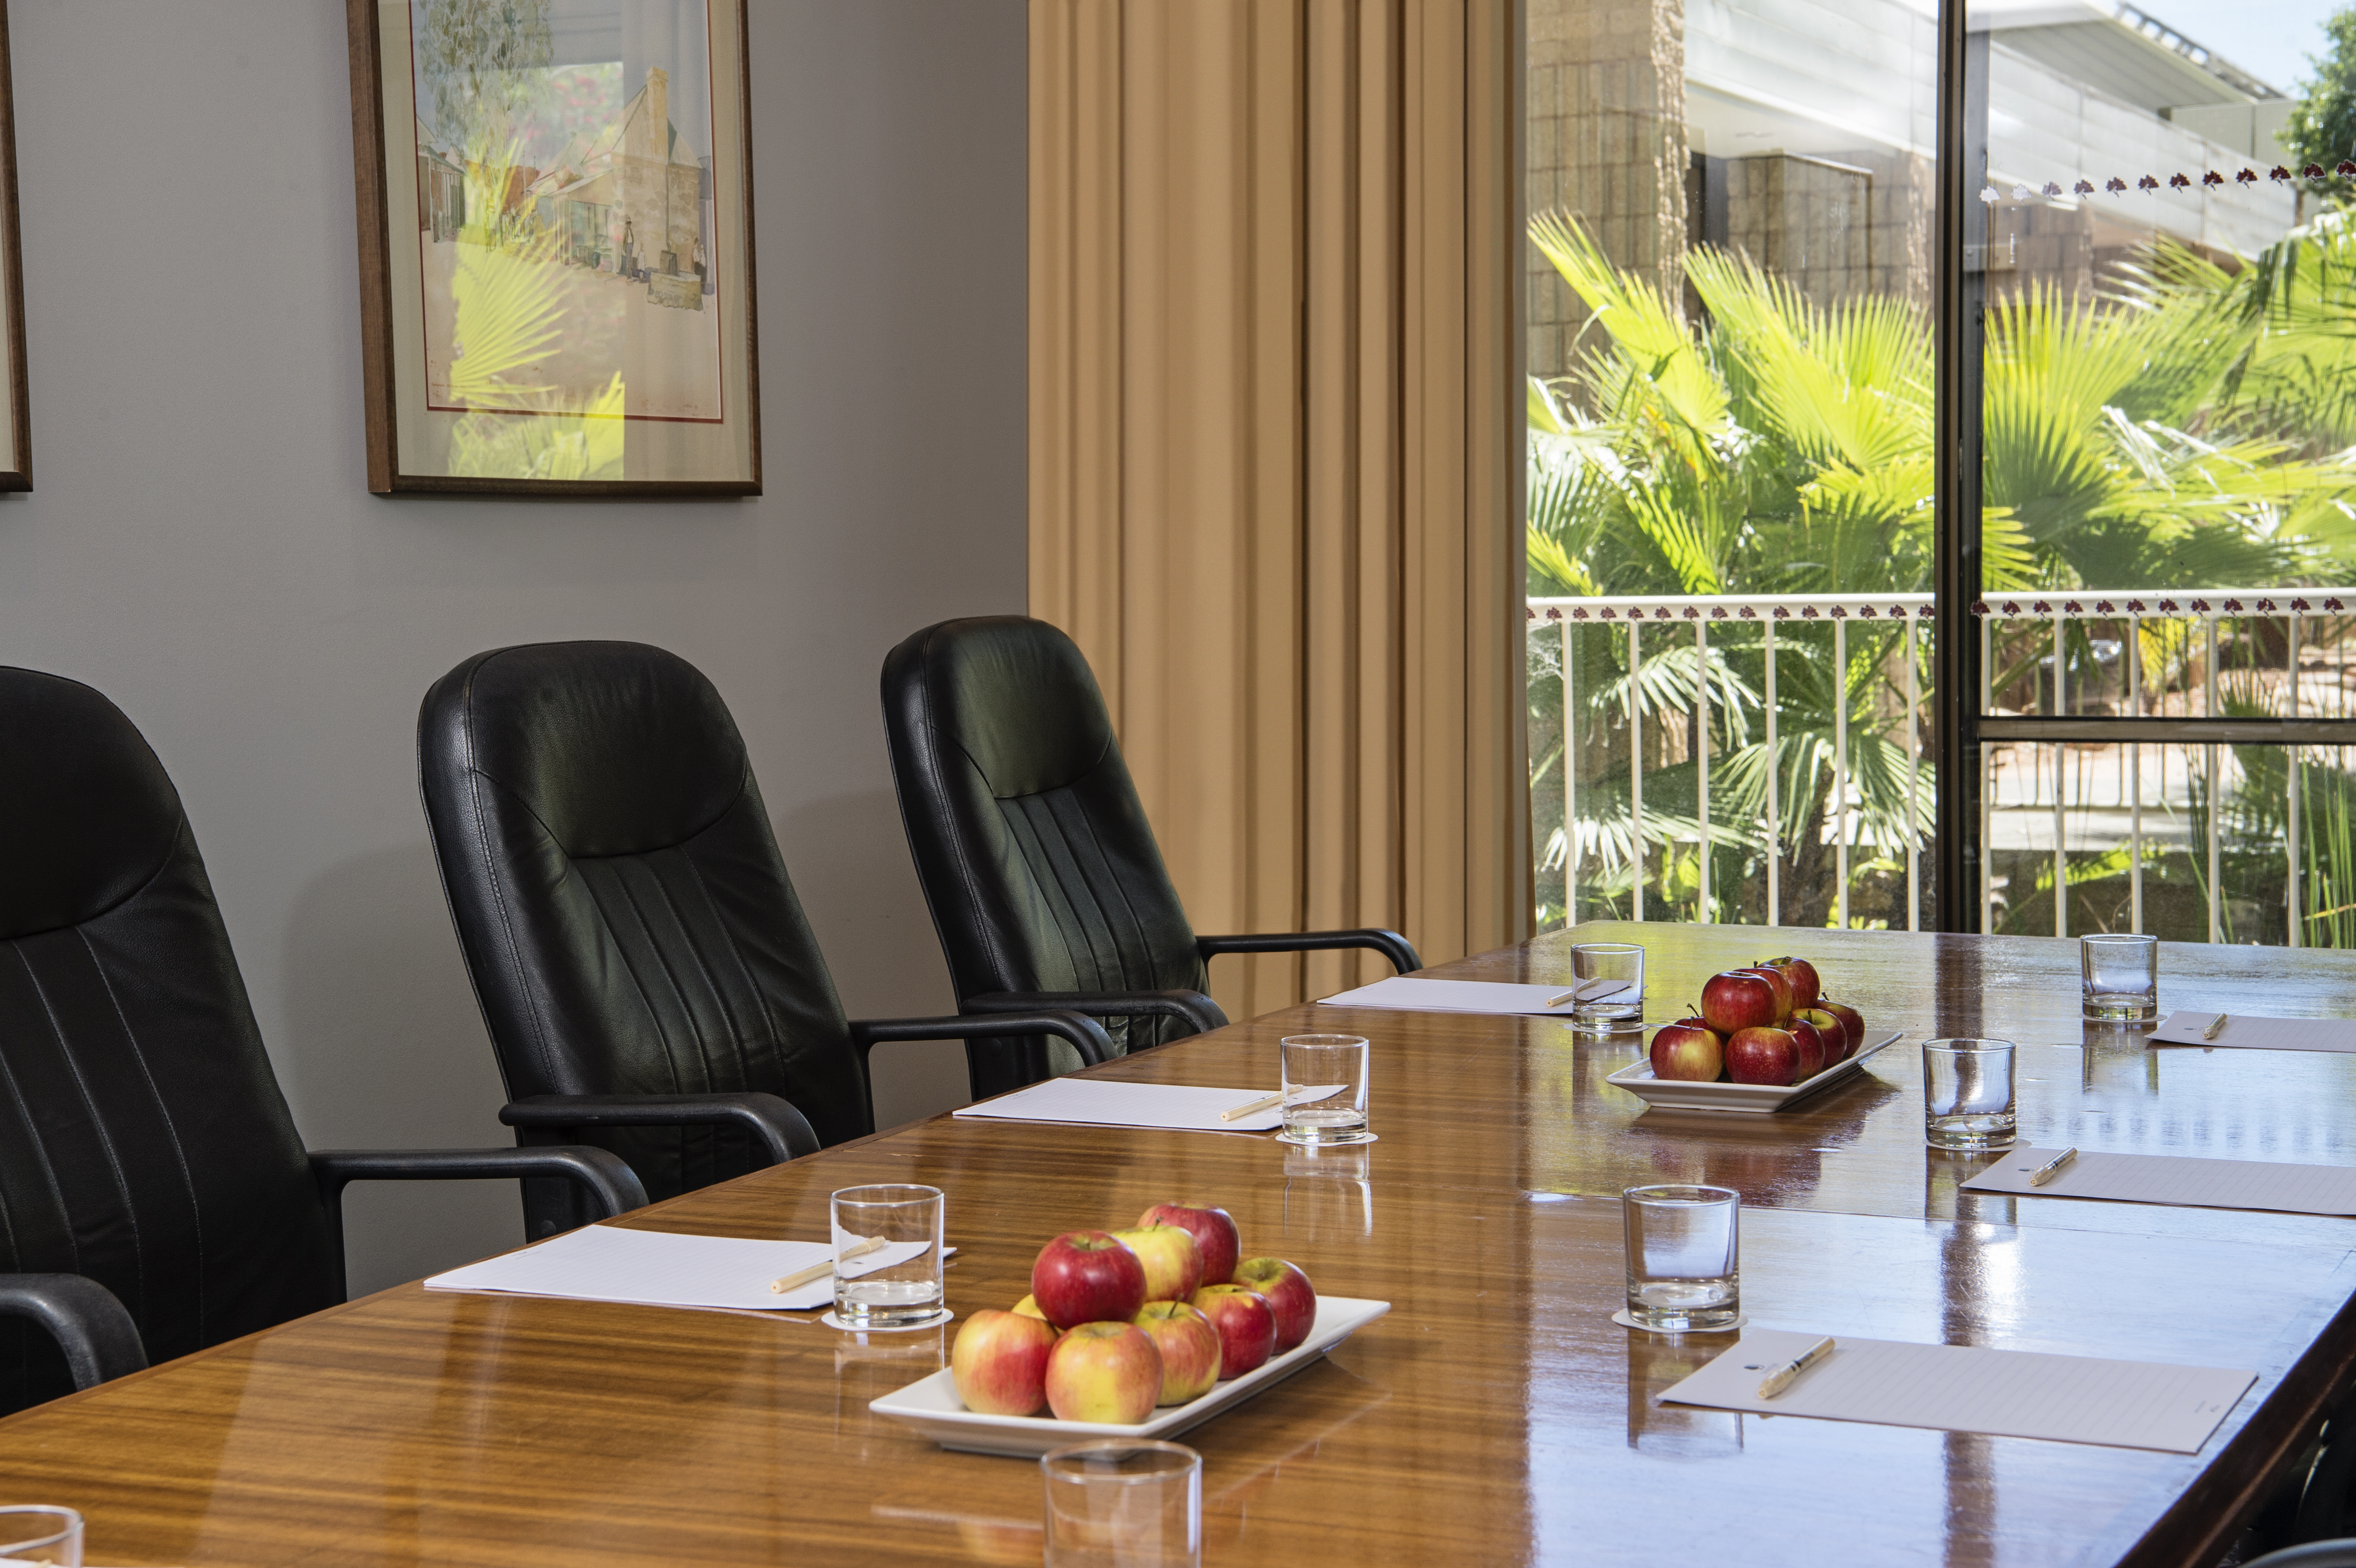 Three Black Chairs at Boardroom Table by Window With Outside View